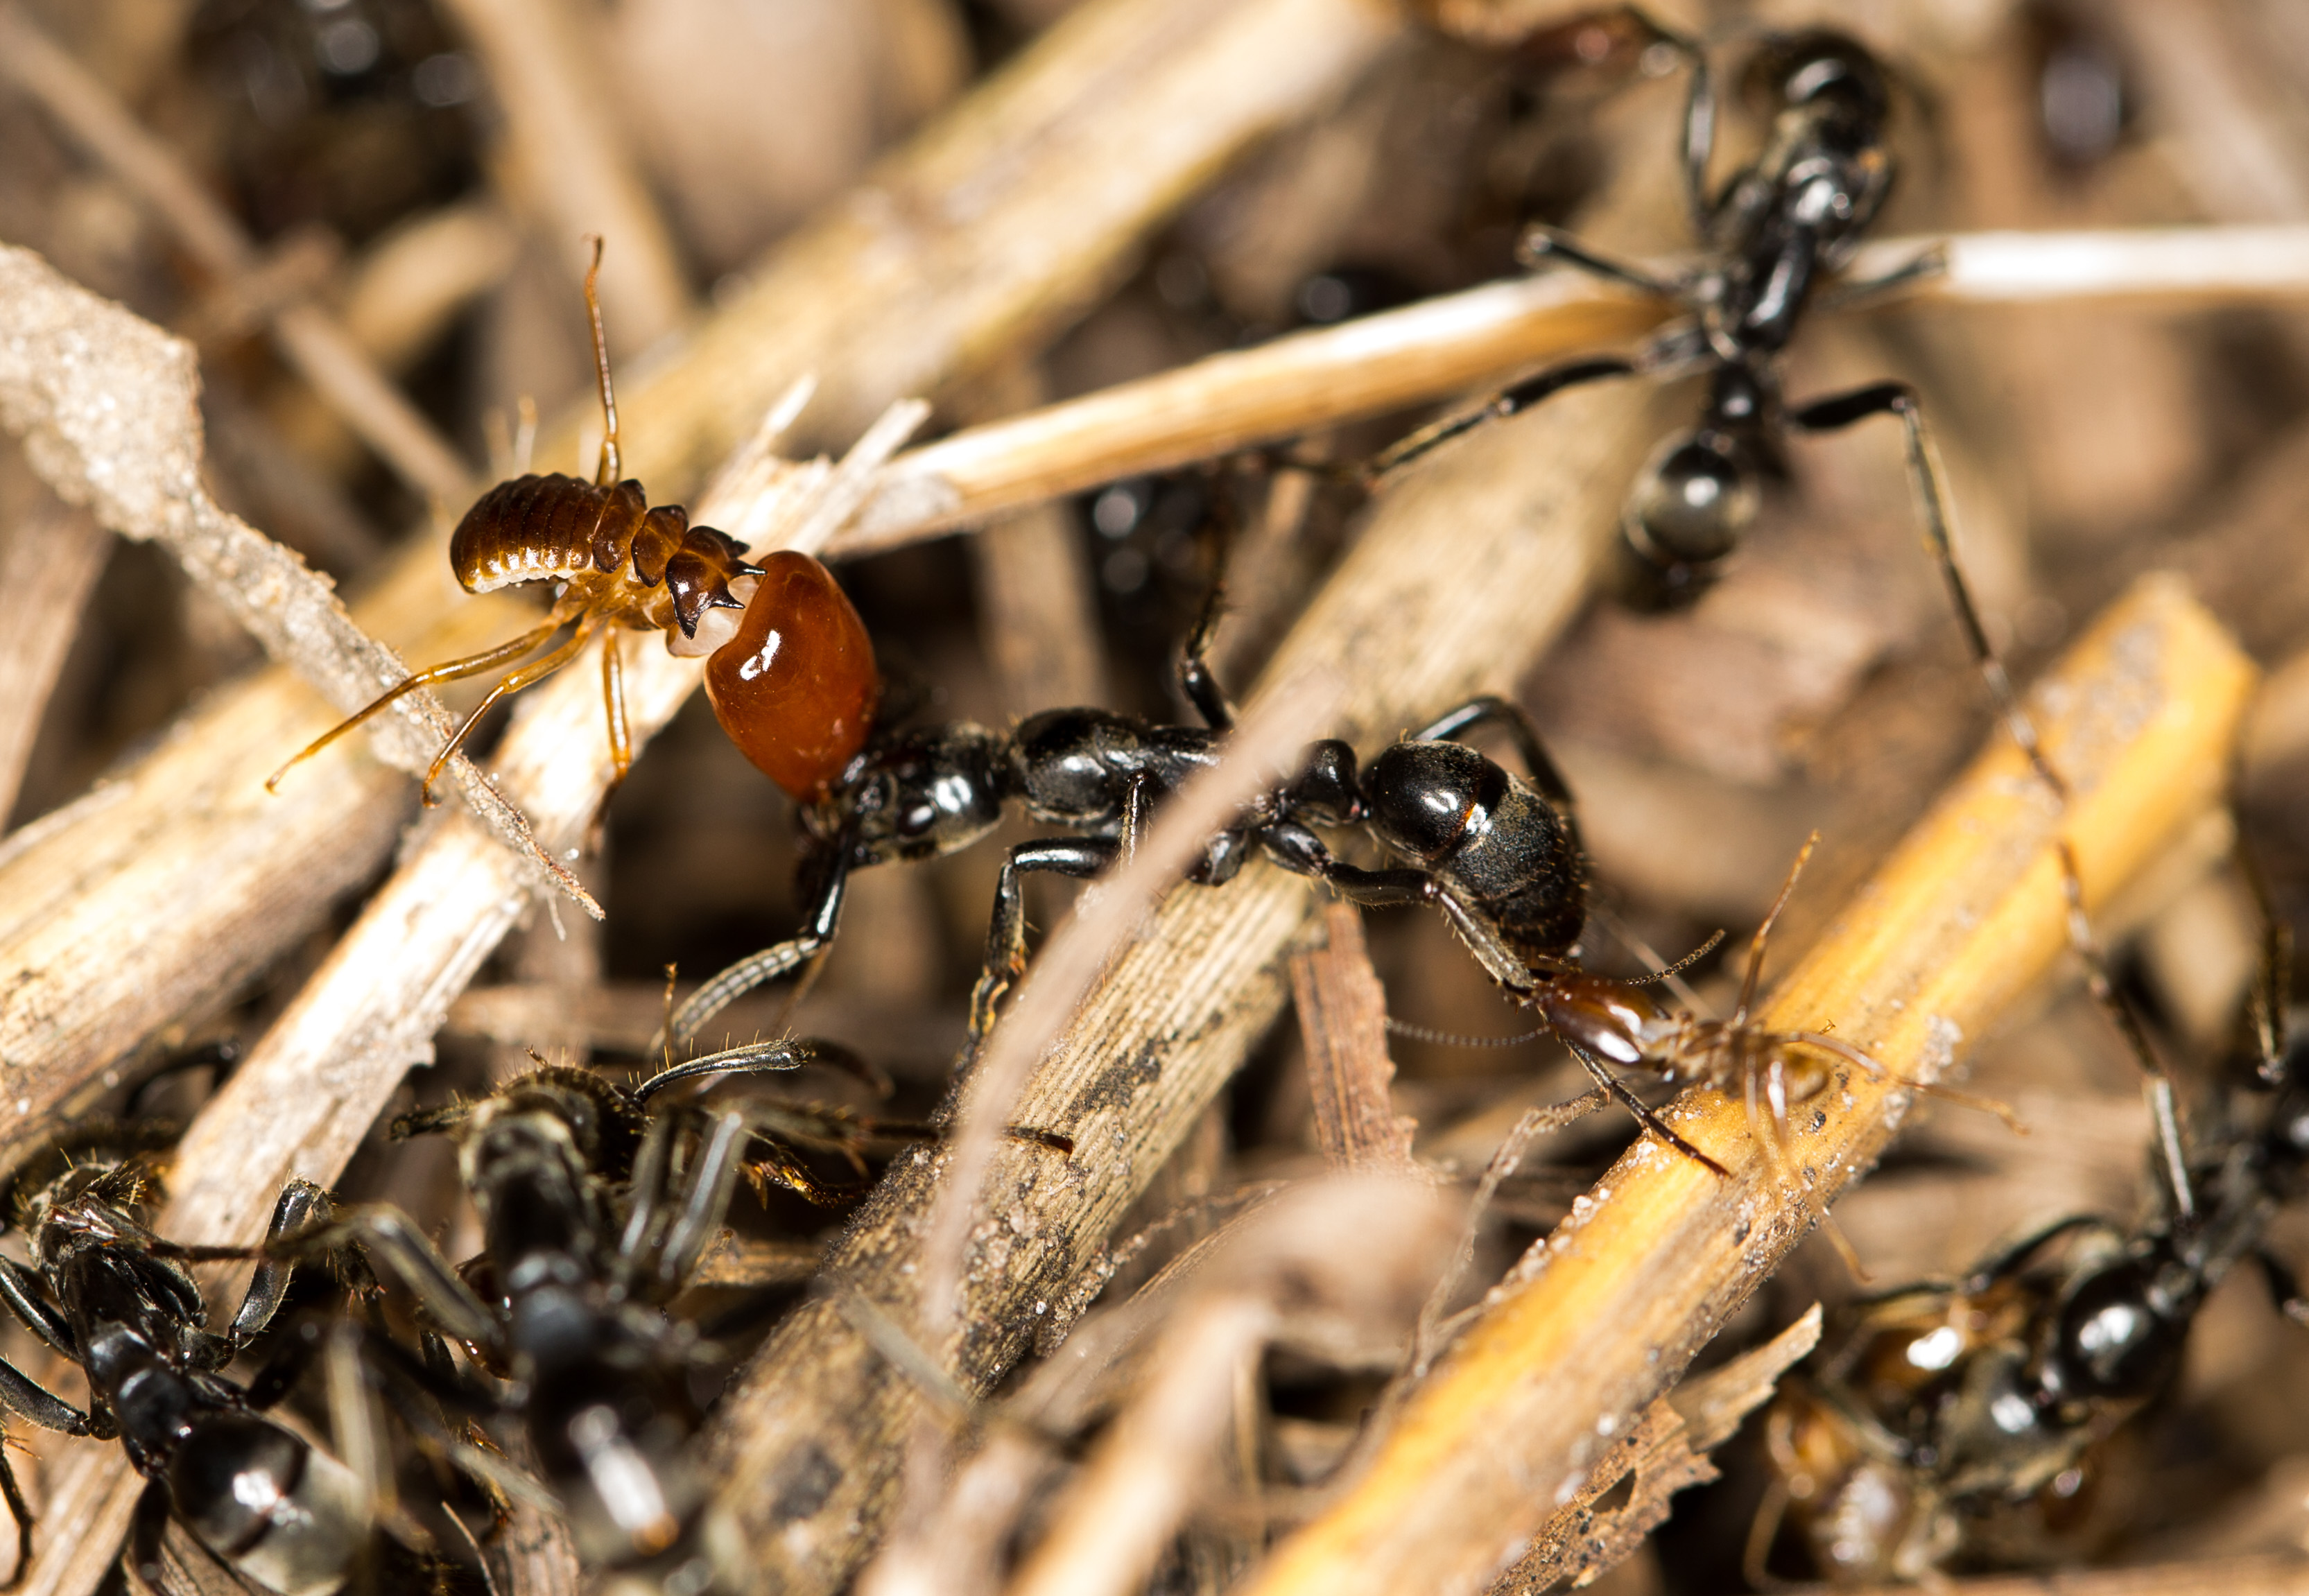 ants’ ability to heal comrades may hold lessons for human infections